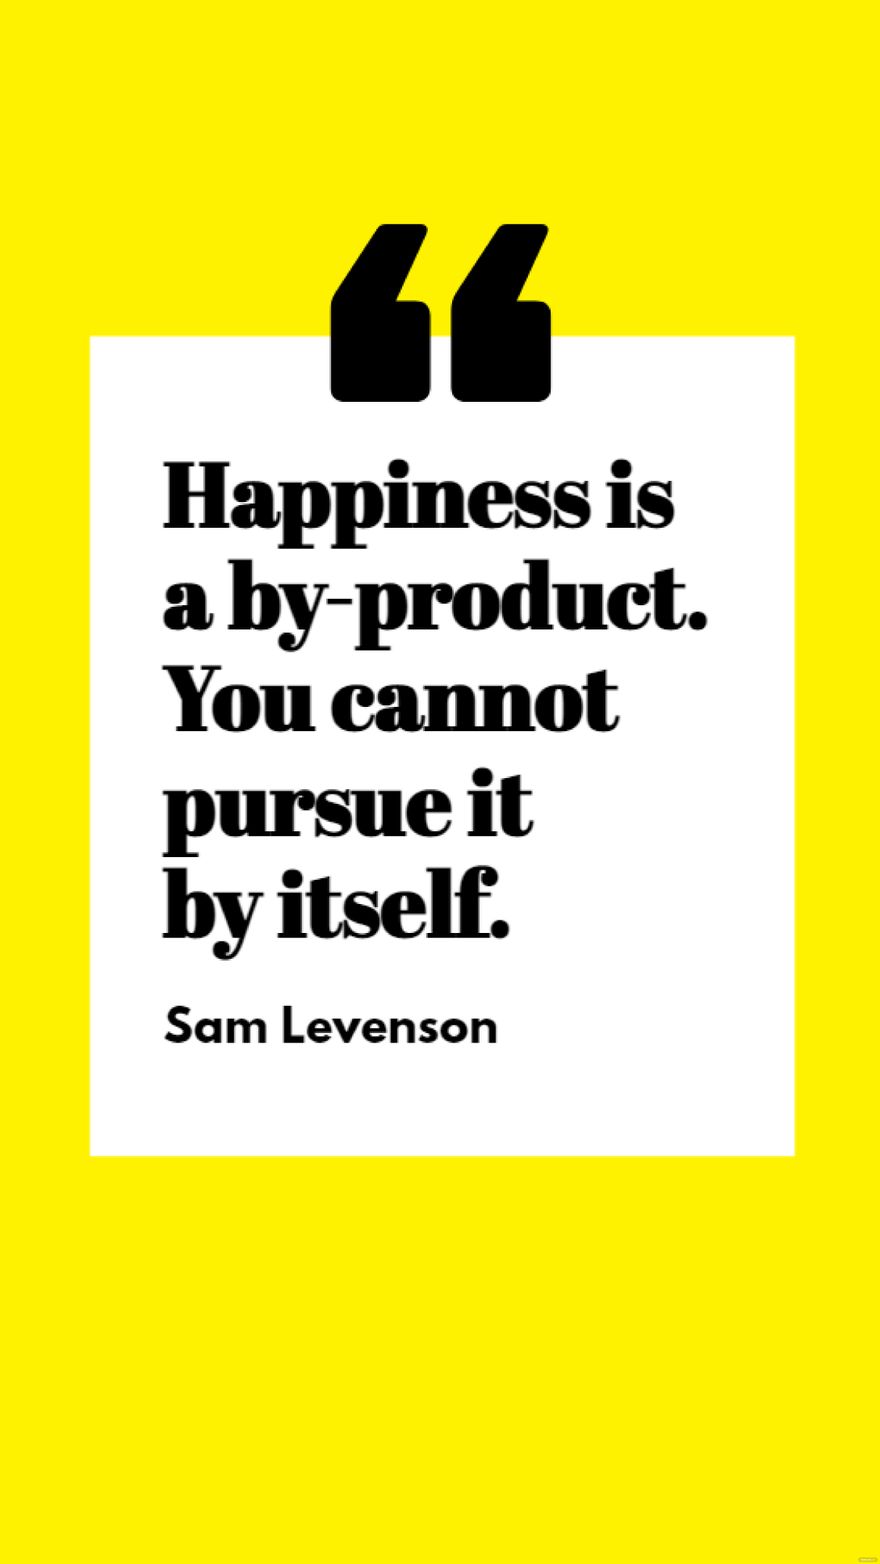 Sam Levenson - Happiness is a by-product. You cannot pursue it by itself.